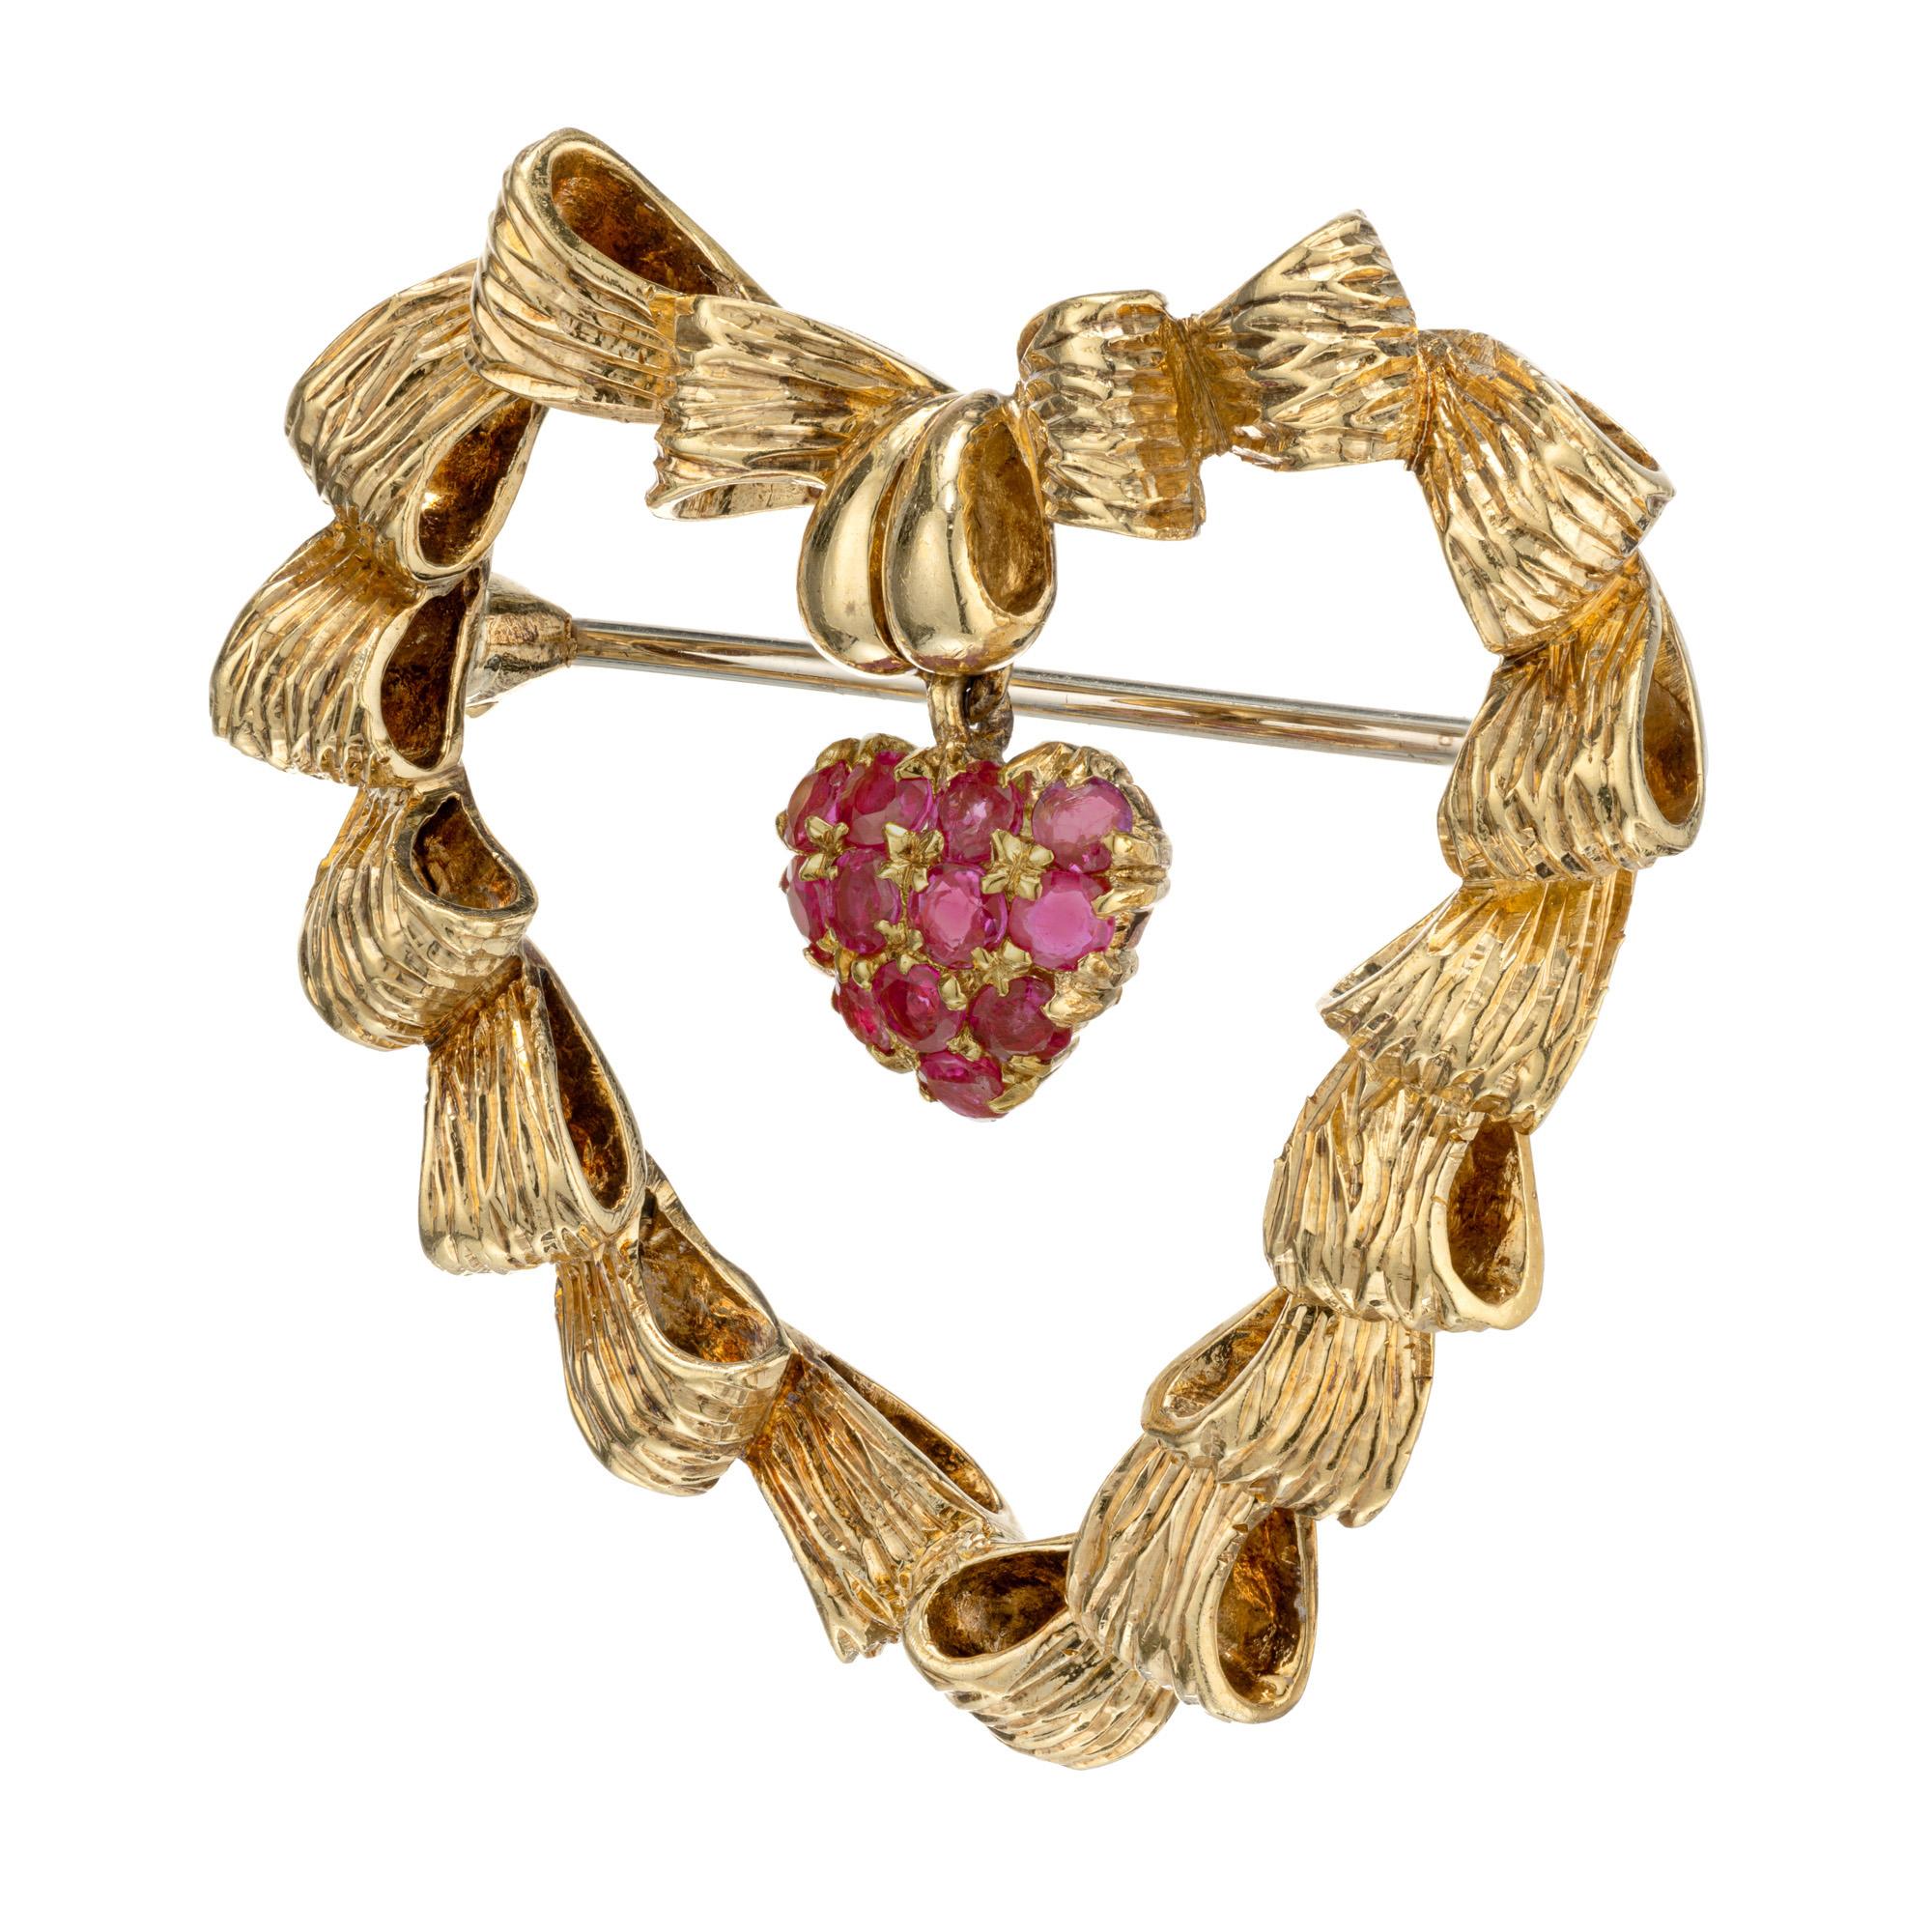 Tiffany & Co circa 1950 to 1960 solid 18k yellow gold Italian made heart brooch, with 12 round rubies in a heart shape dangle. 

12 round fine natural Rubies, approx. total weight .80cts, VS, gem pinkish red
18k Yellow Gold
Stamped: Tiffany & Co 18k